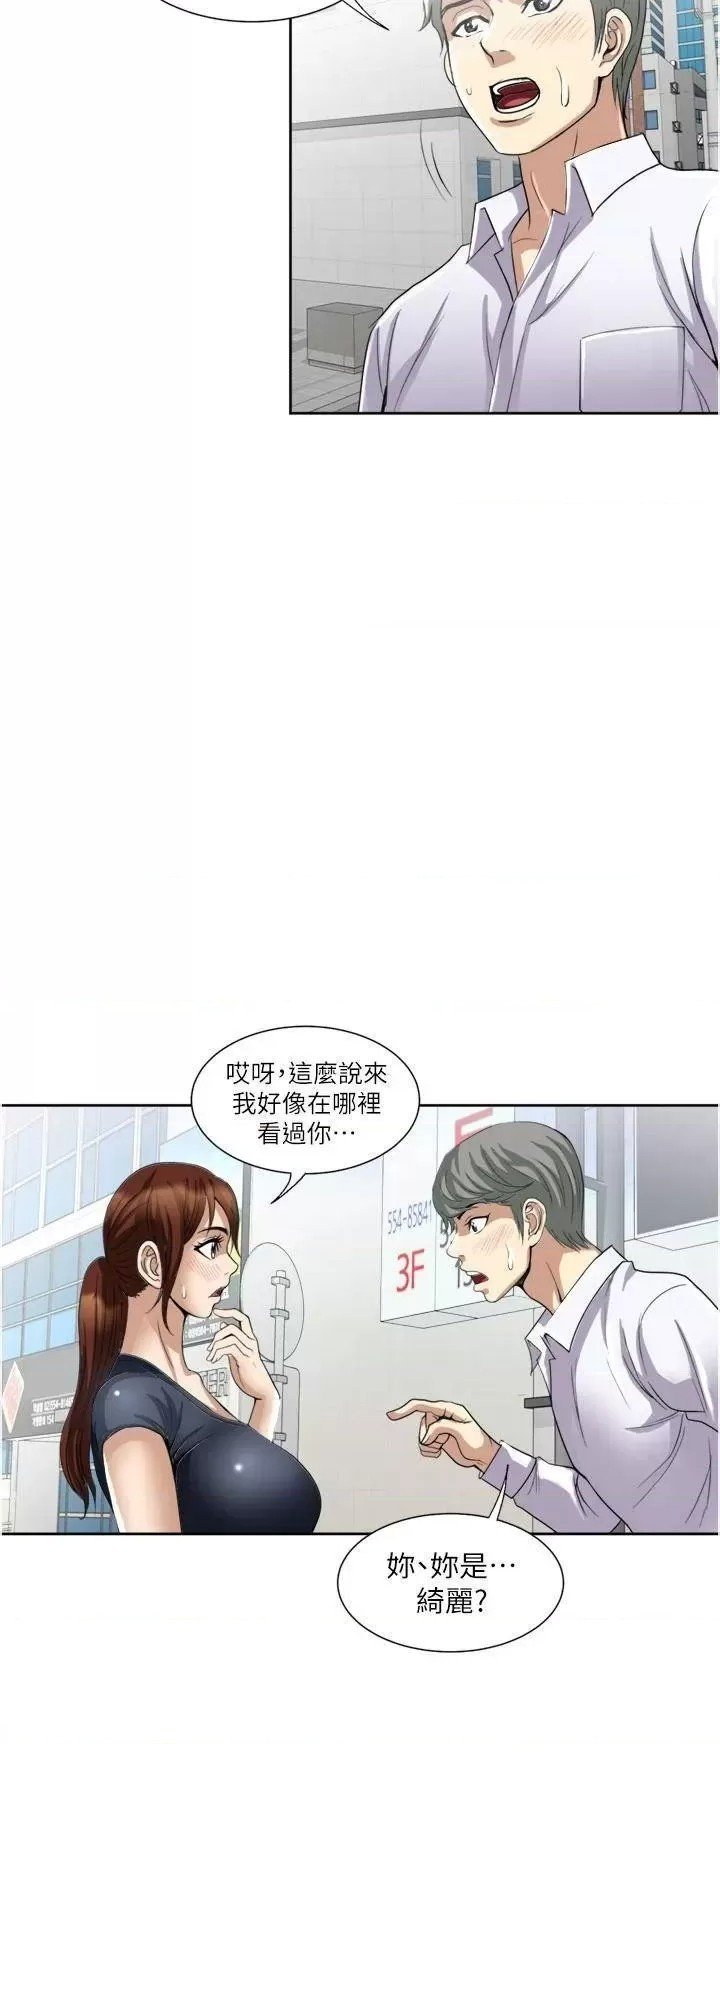 just-once-raw-chap-24-35